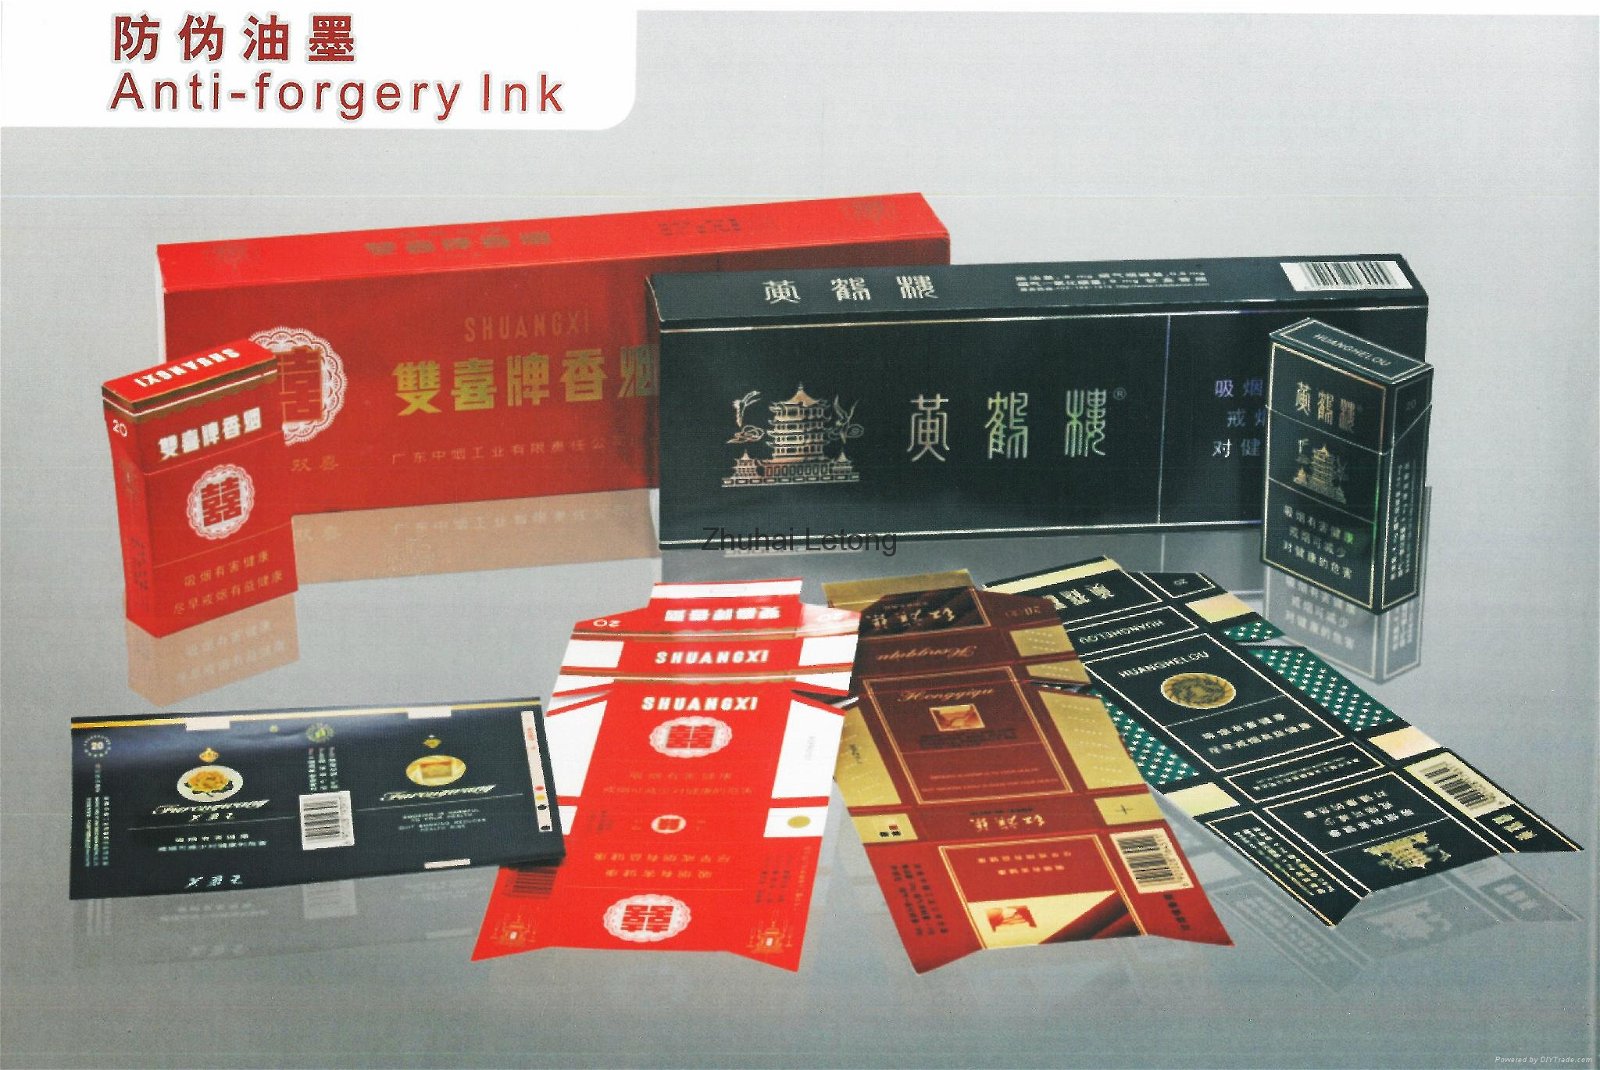 Anti-forgery Ink